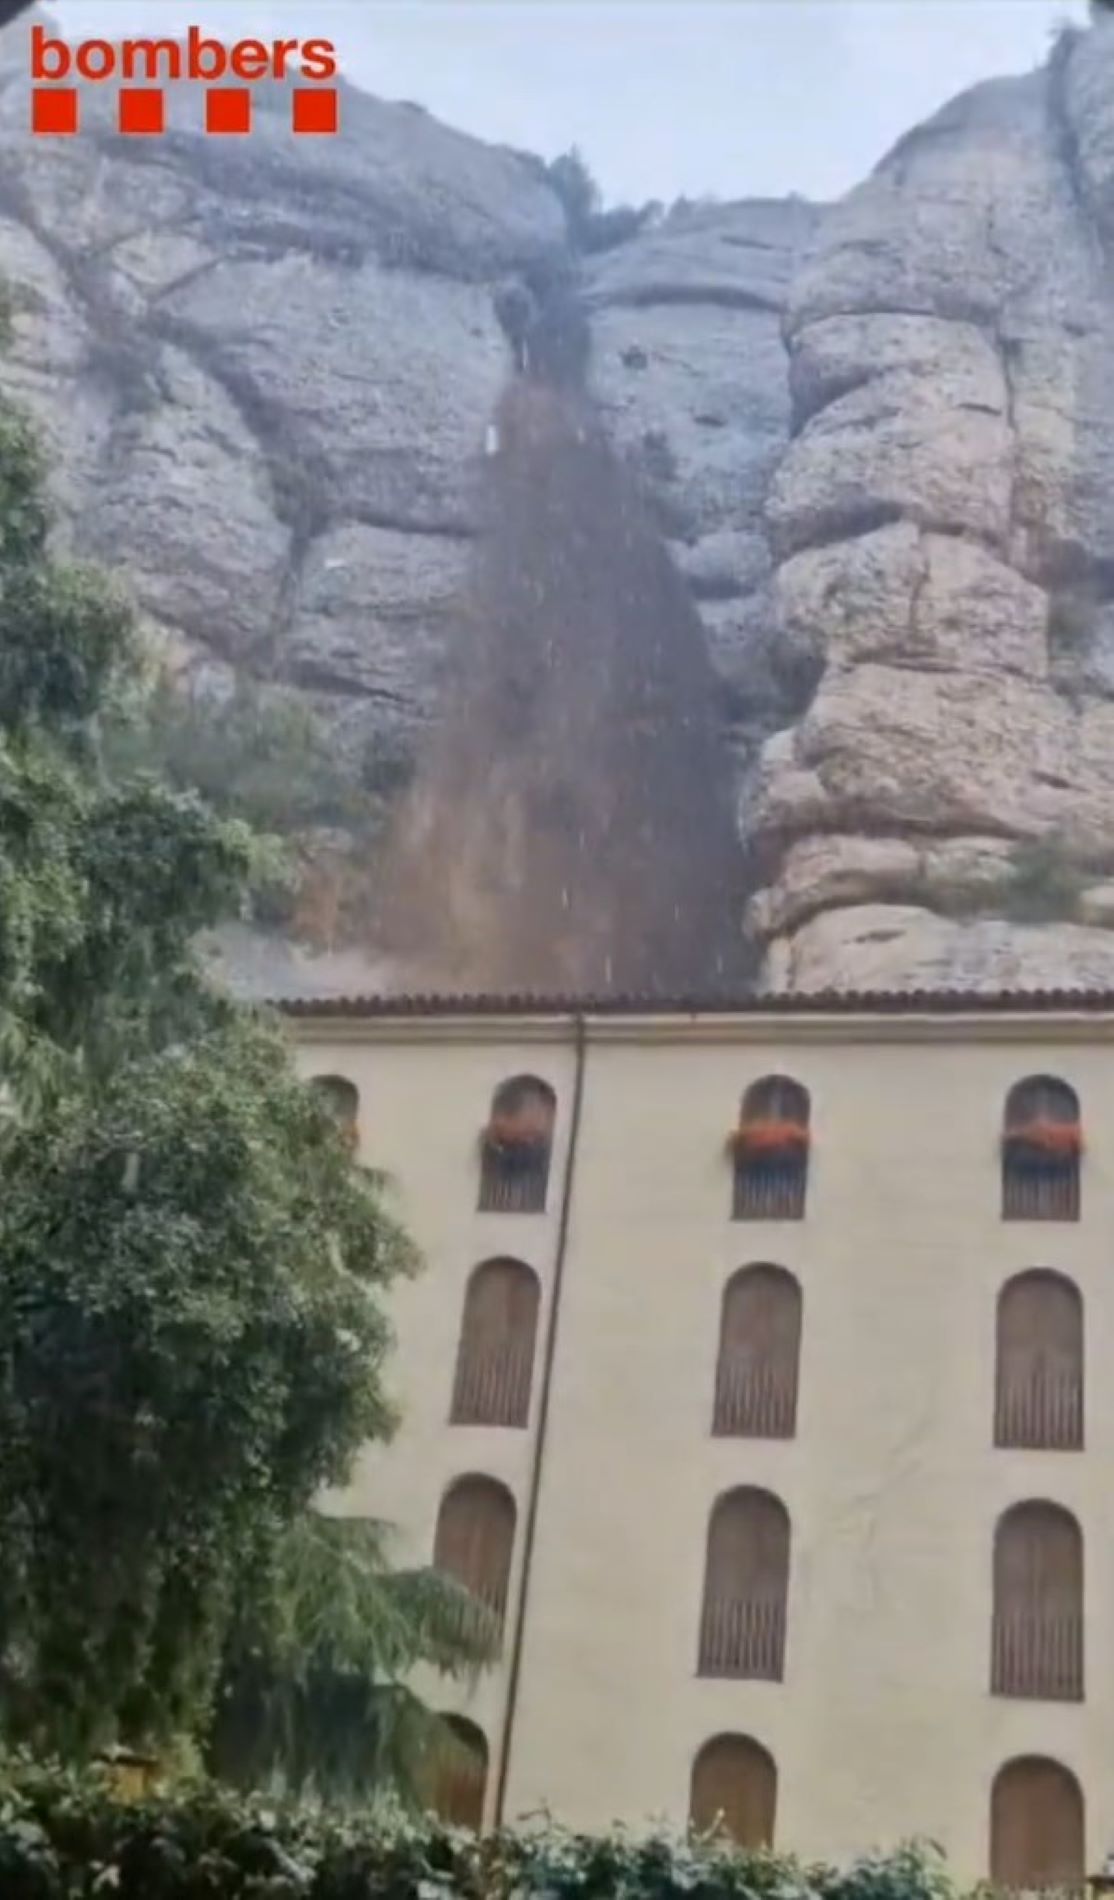 Landslide at Montserrat monastery due to heavy rain: a road closed and the hotel evacuated